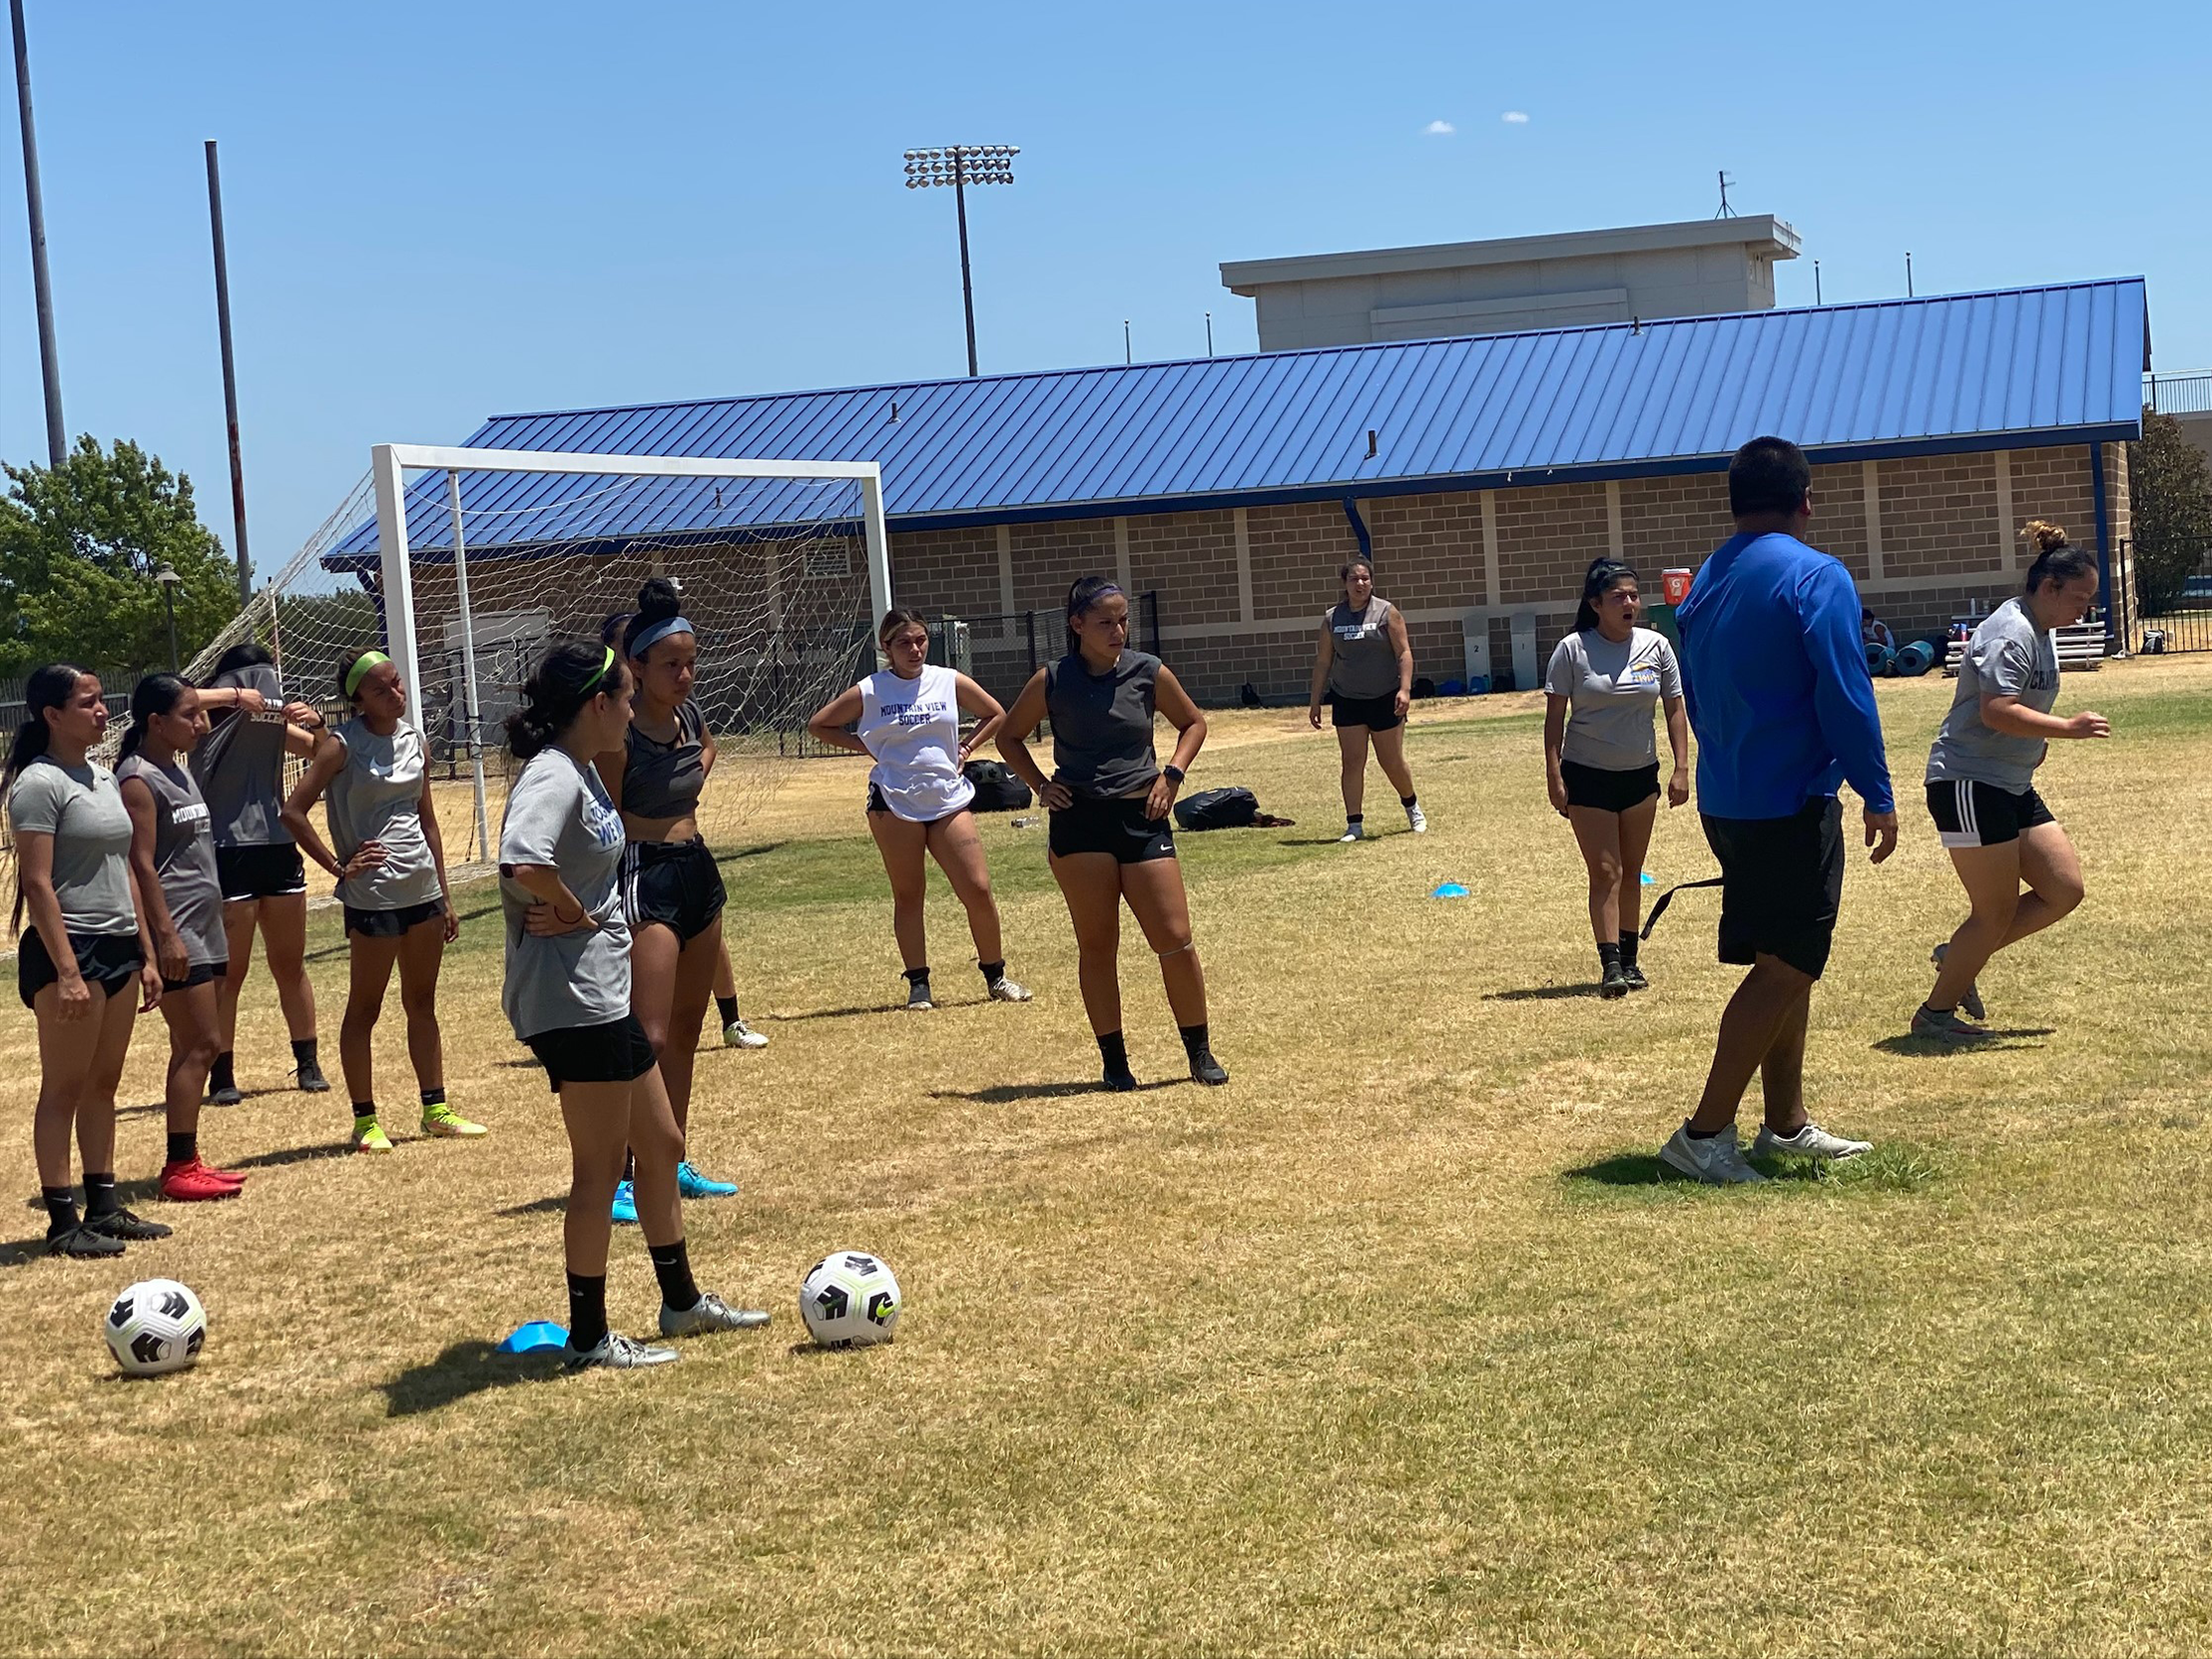 Dallas College Mountain View women's soccer team will play Dallas College North Lake in the NJCAA DIII Mid-South District quarterfinals Tuesday at Dallas College Brookhaven. 